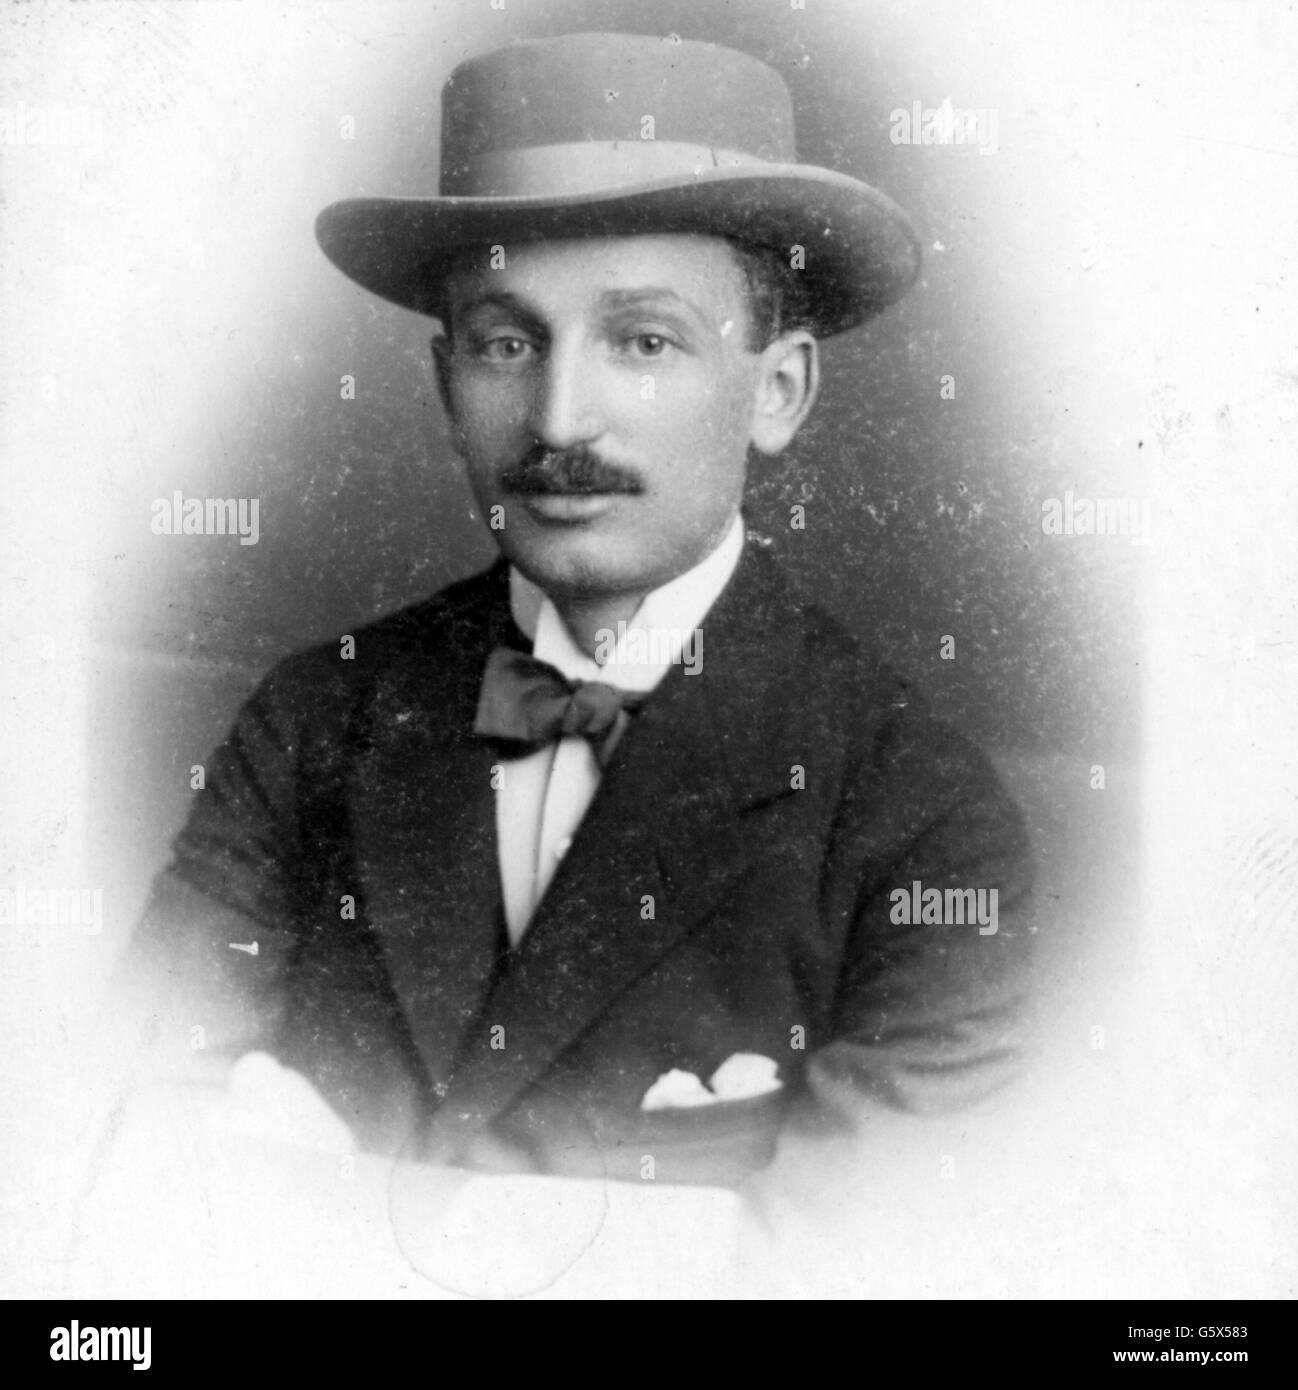 Somlo, Josef, 5.10.1884 - 29.11.1973, Hungarian producer, portrait, cabinet card, Anglo American Photographers, Vienna, 1915, Stock Photo